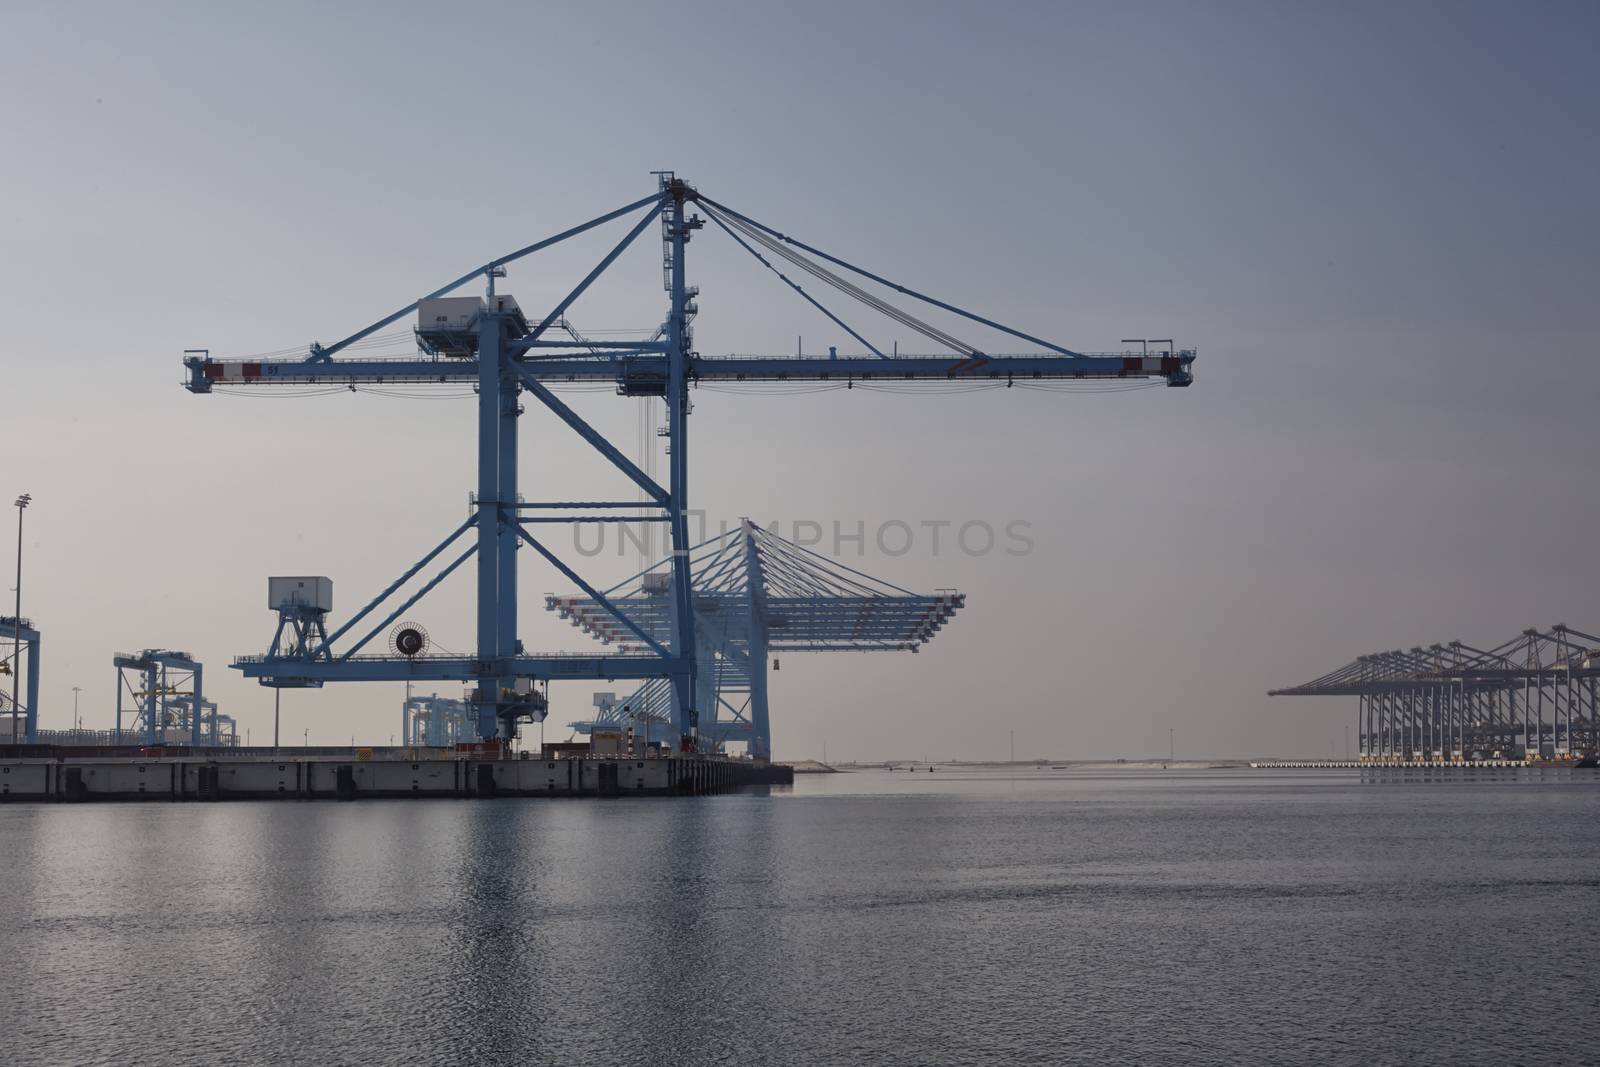 Deserted port terminal in the morning in a harbour for loading and offloading cargo ships and freight with rows of large industrial cranes to lift goods off the decks and from the holds by janssenkruseproductions